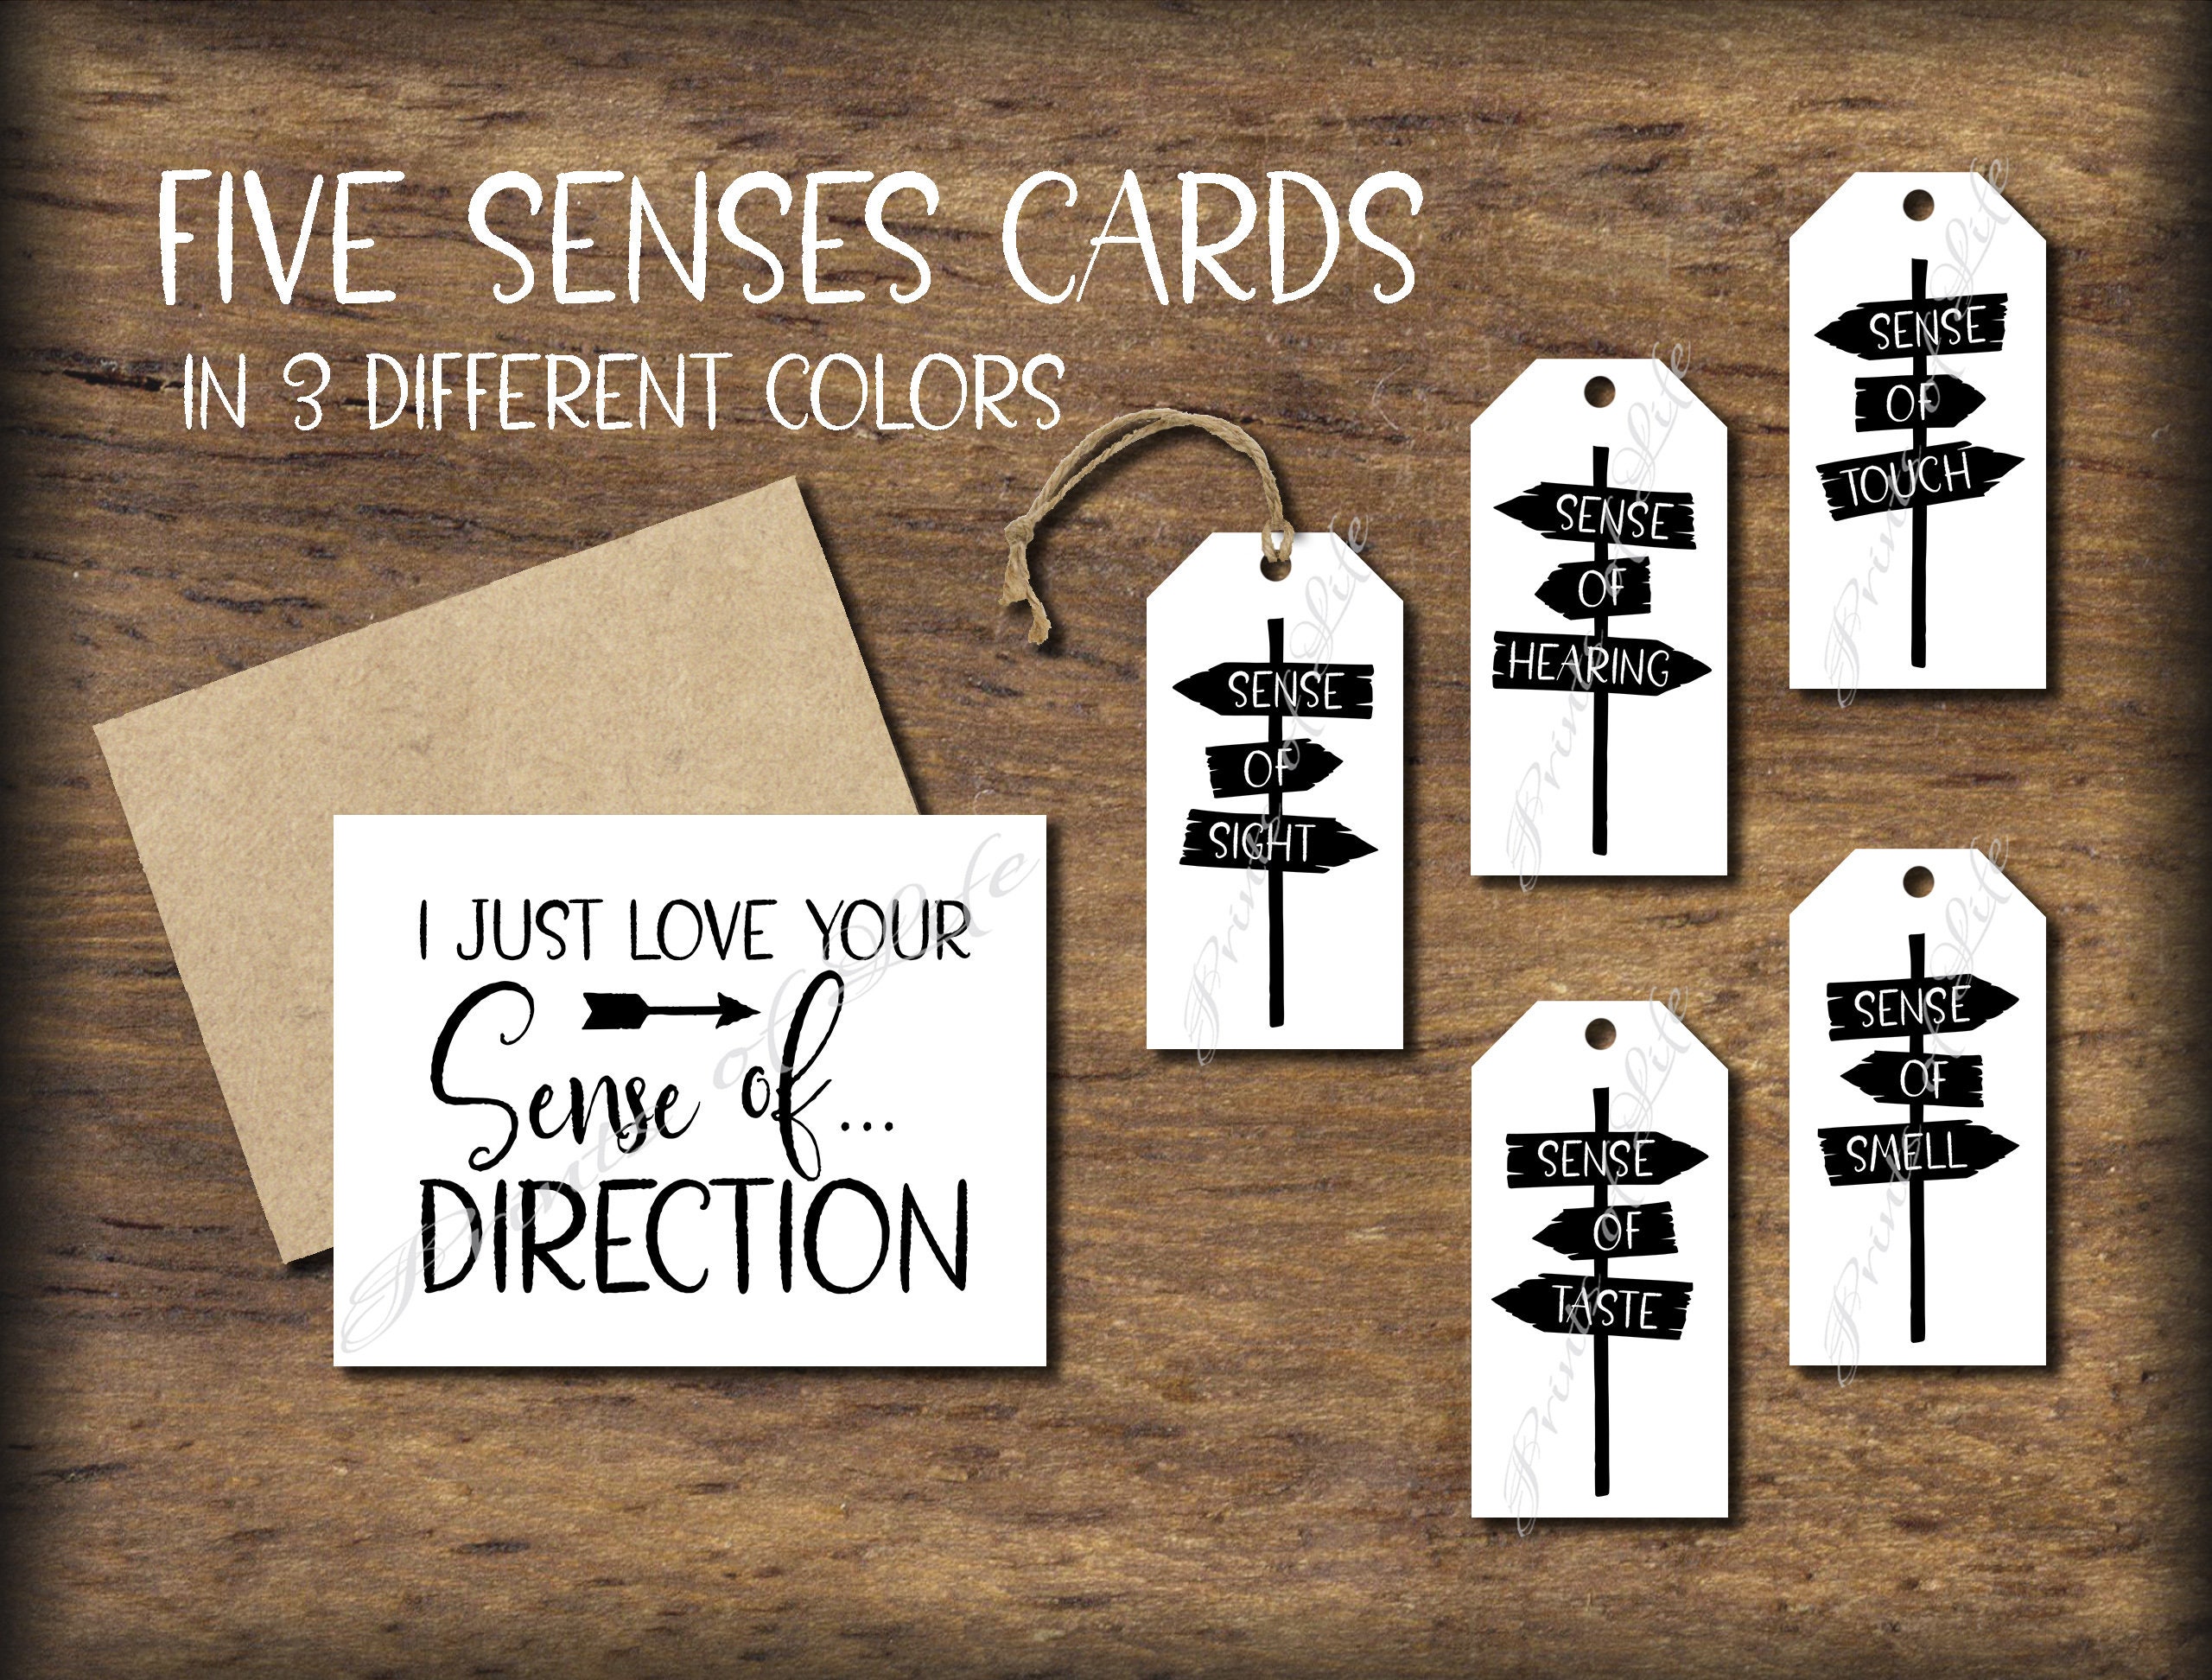 5 Senses Gift Tags One Year Anniversary Gifts for Boyfriend -   Five  senses gift, Romantic gifts for him, Boyfriend anniversary gifts